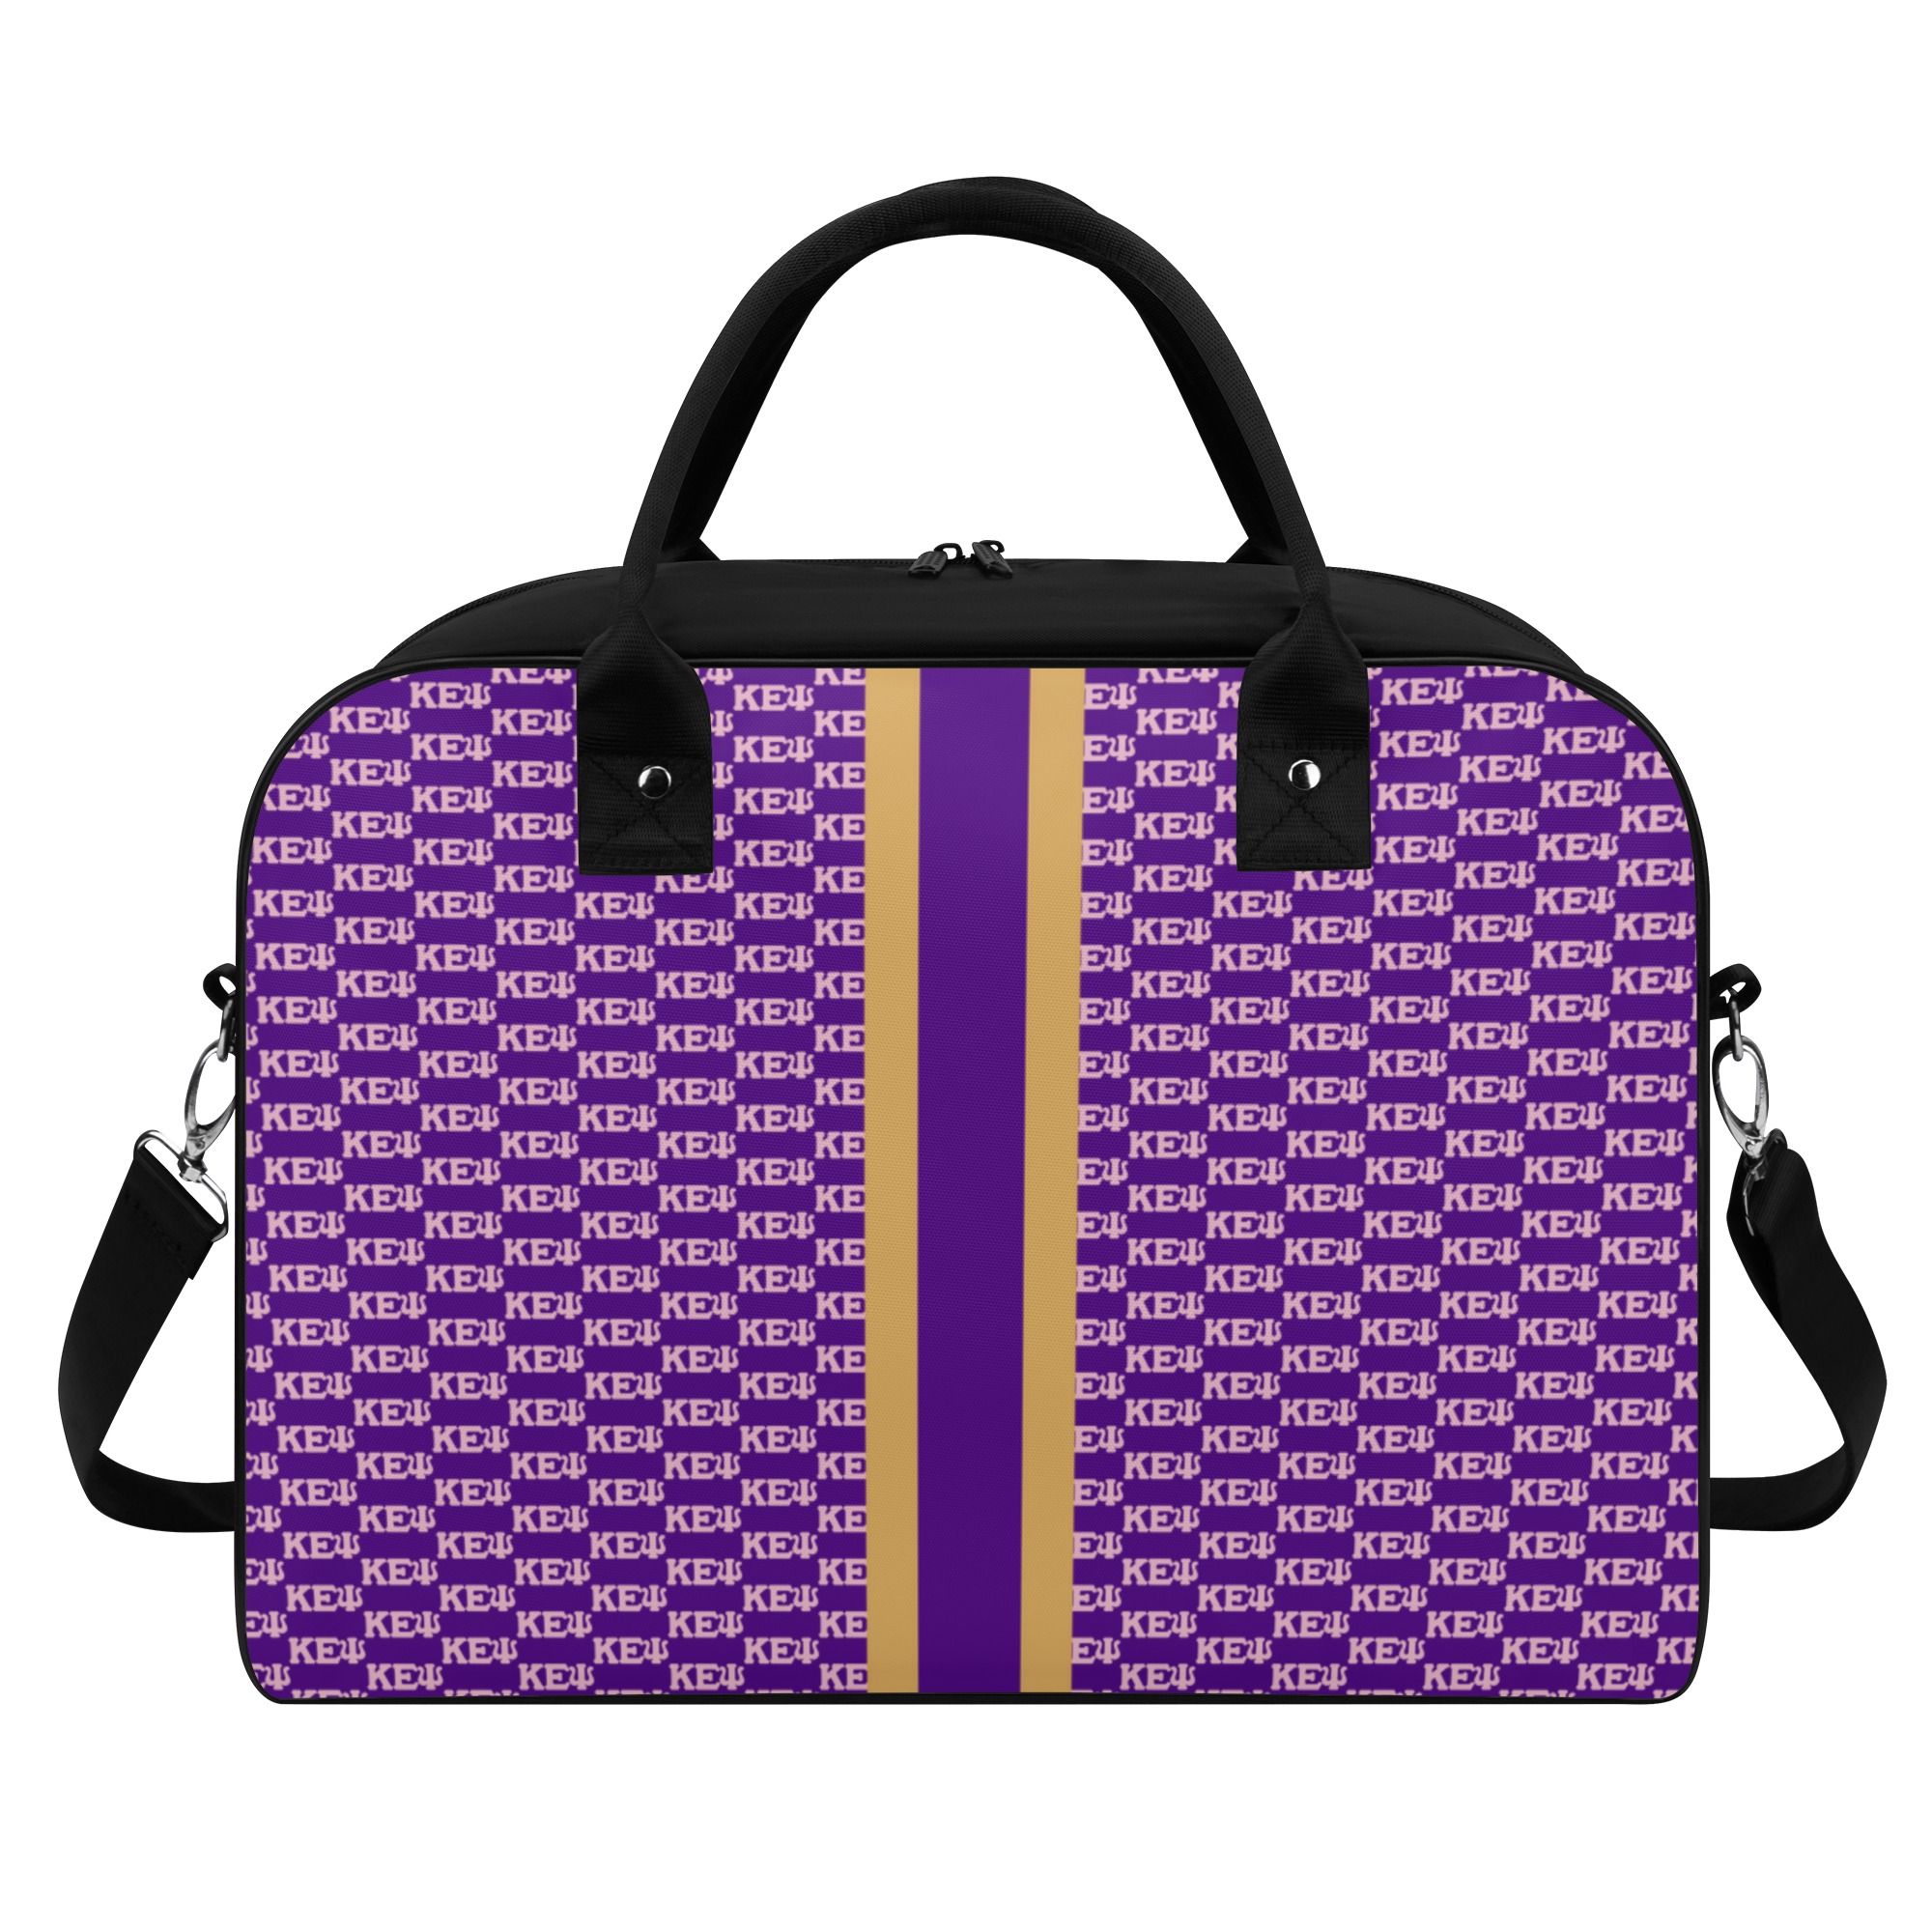 Patterned duffle bag with purple stripe